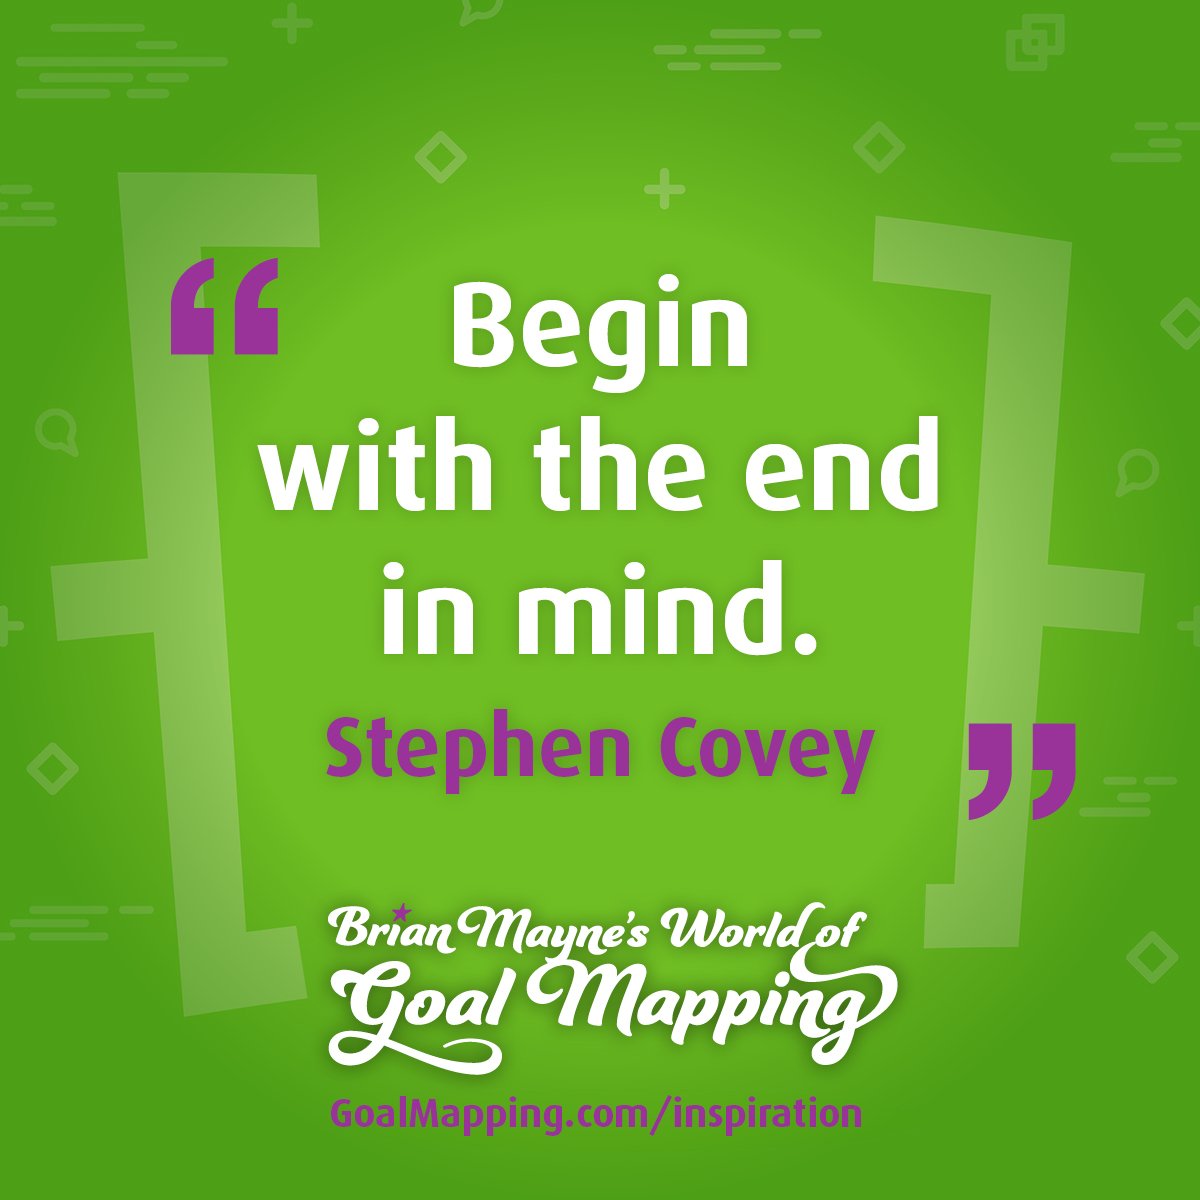 "Begin with the end in mind." Stephen Covey